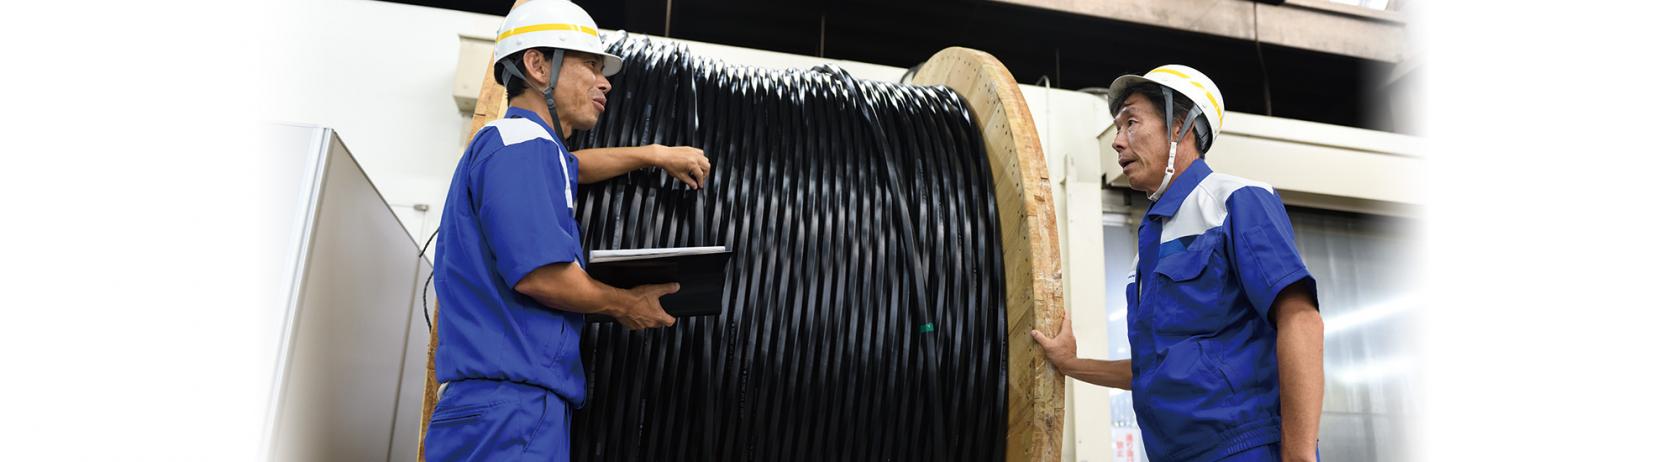 3456-fiber-count optical cable awaiting shipment (left: Takehiko Okada, General Manager of the Cable Manufacturing Dept., right: Tsuguo Amano, General Manager of the Engineering Dept.)